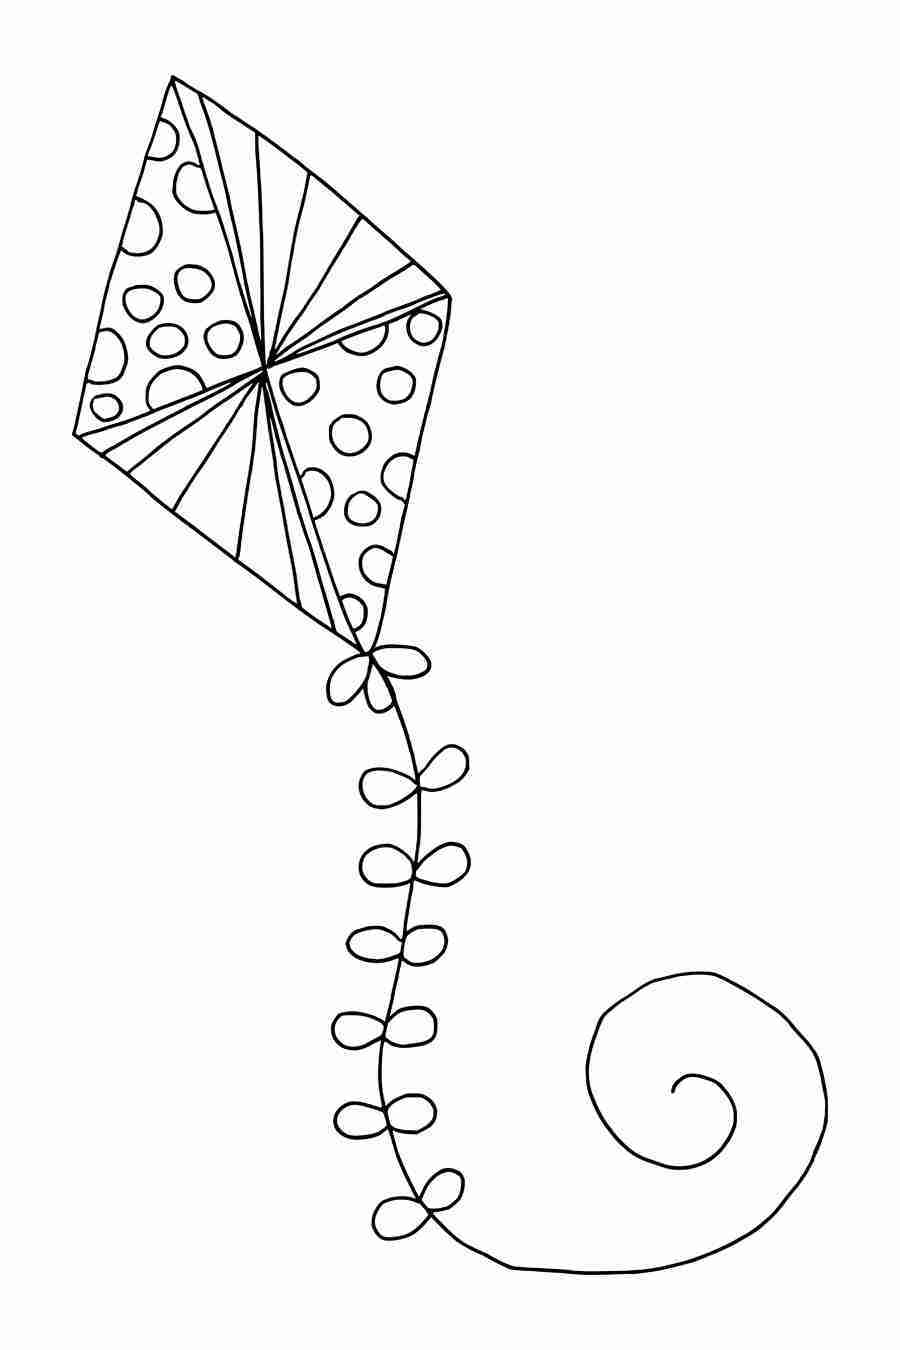 kids-flying-kites-coloring-page-coloring-pages